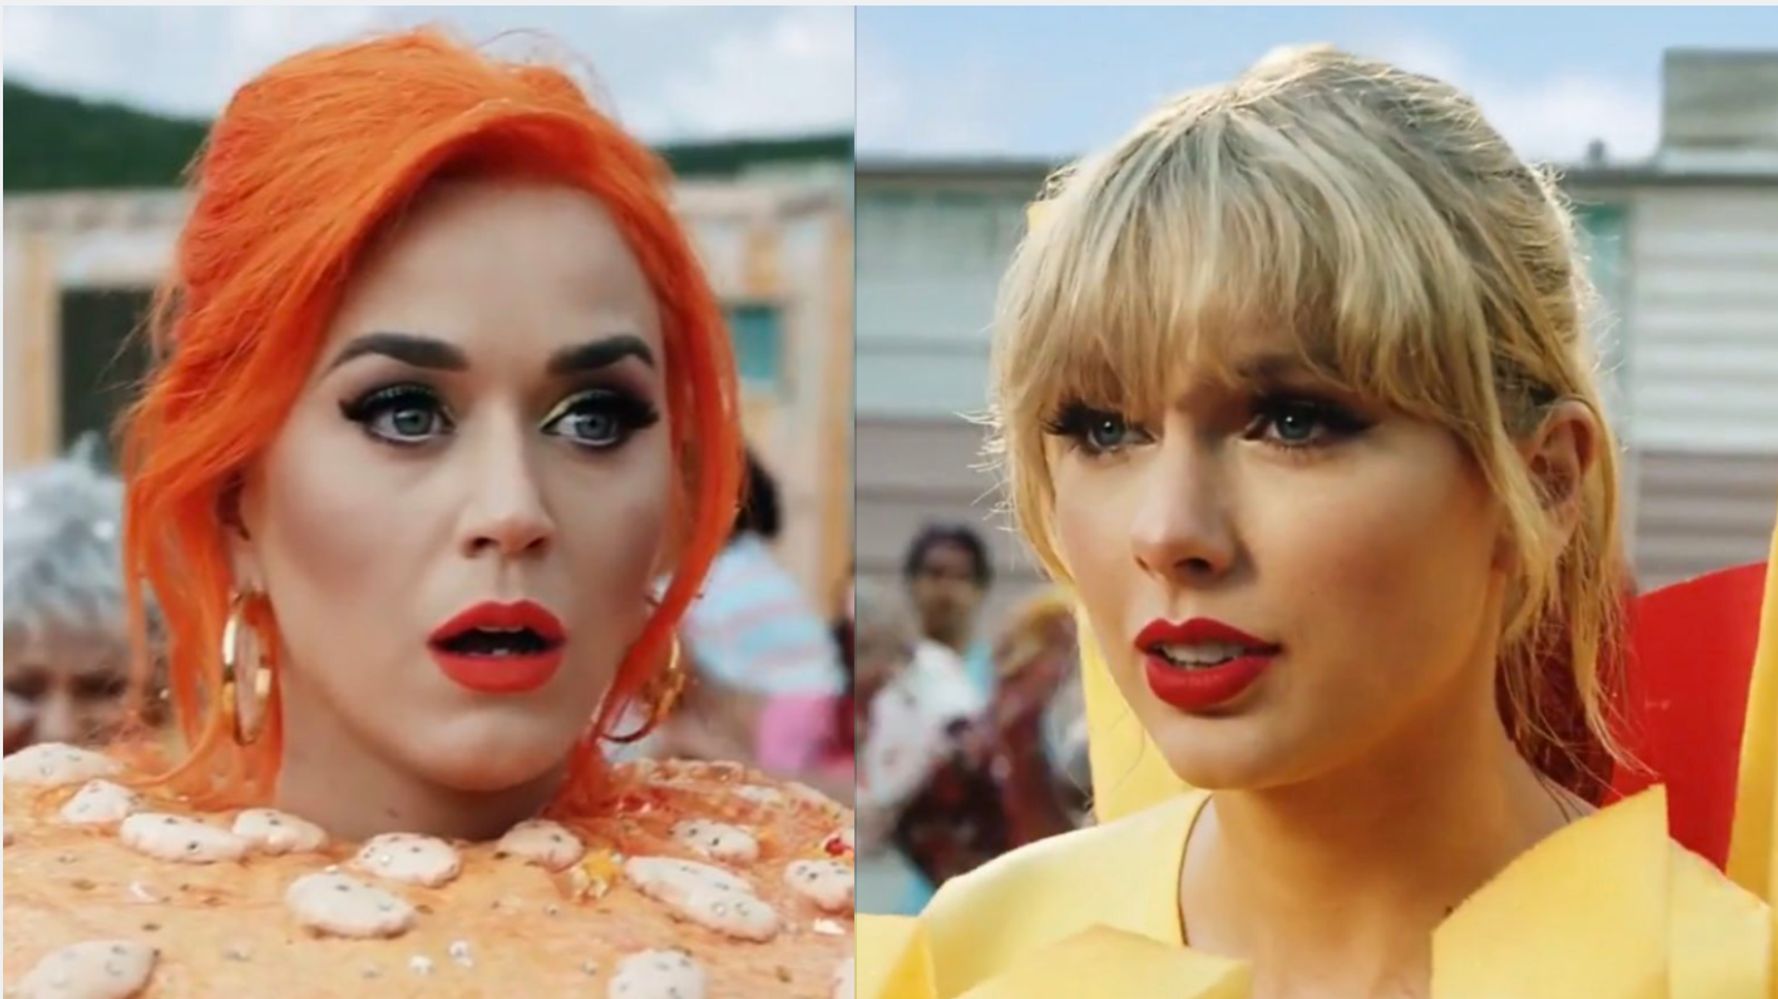 Taylor Swift And Katy Perry End Feud In You Need To Calm